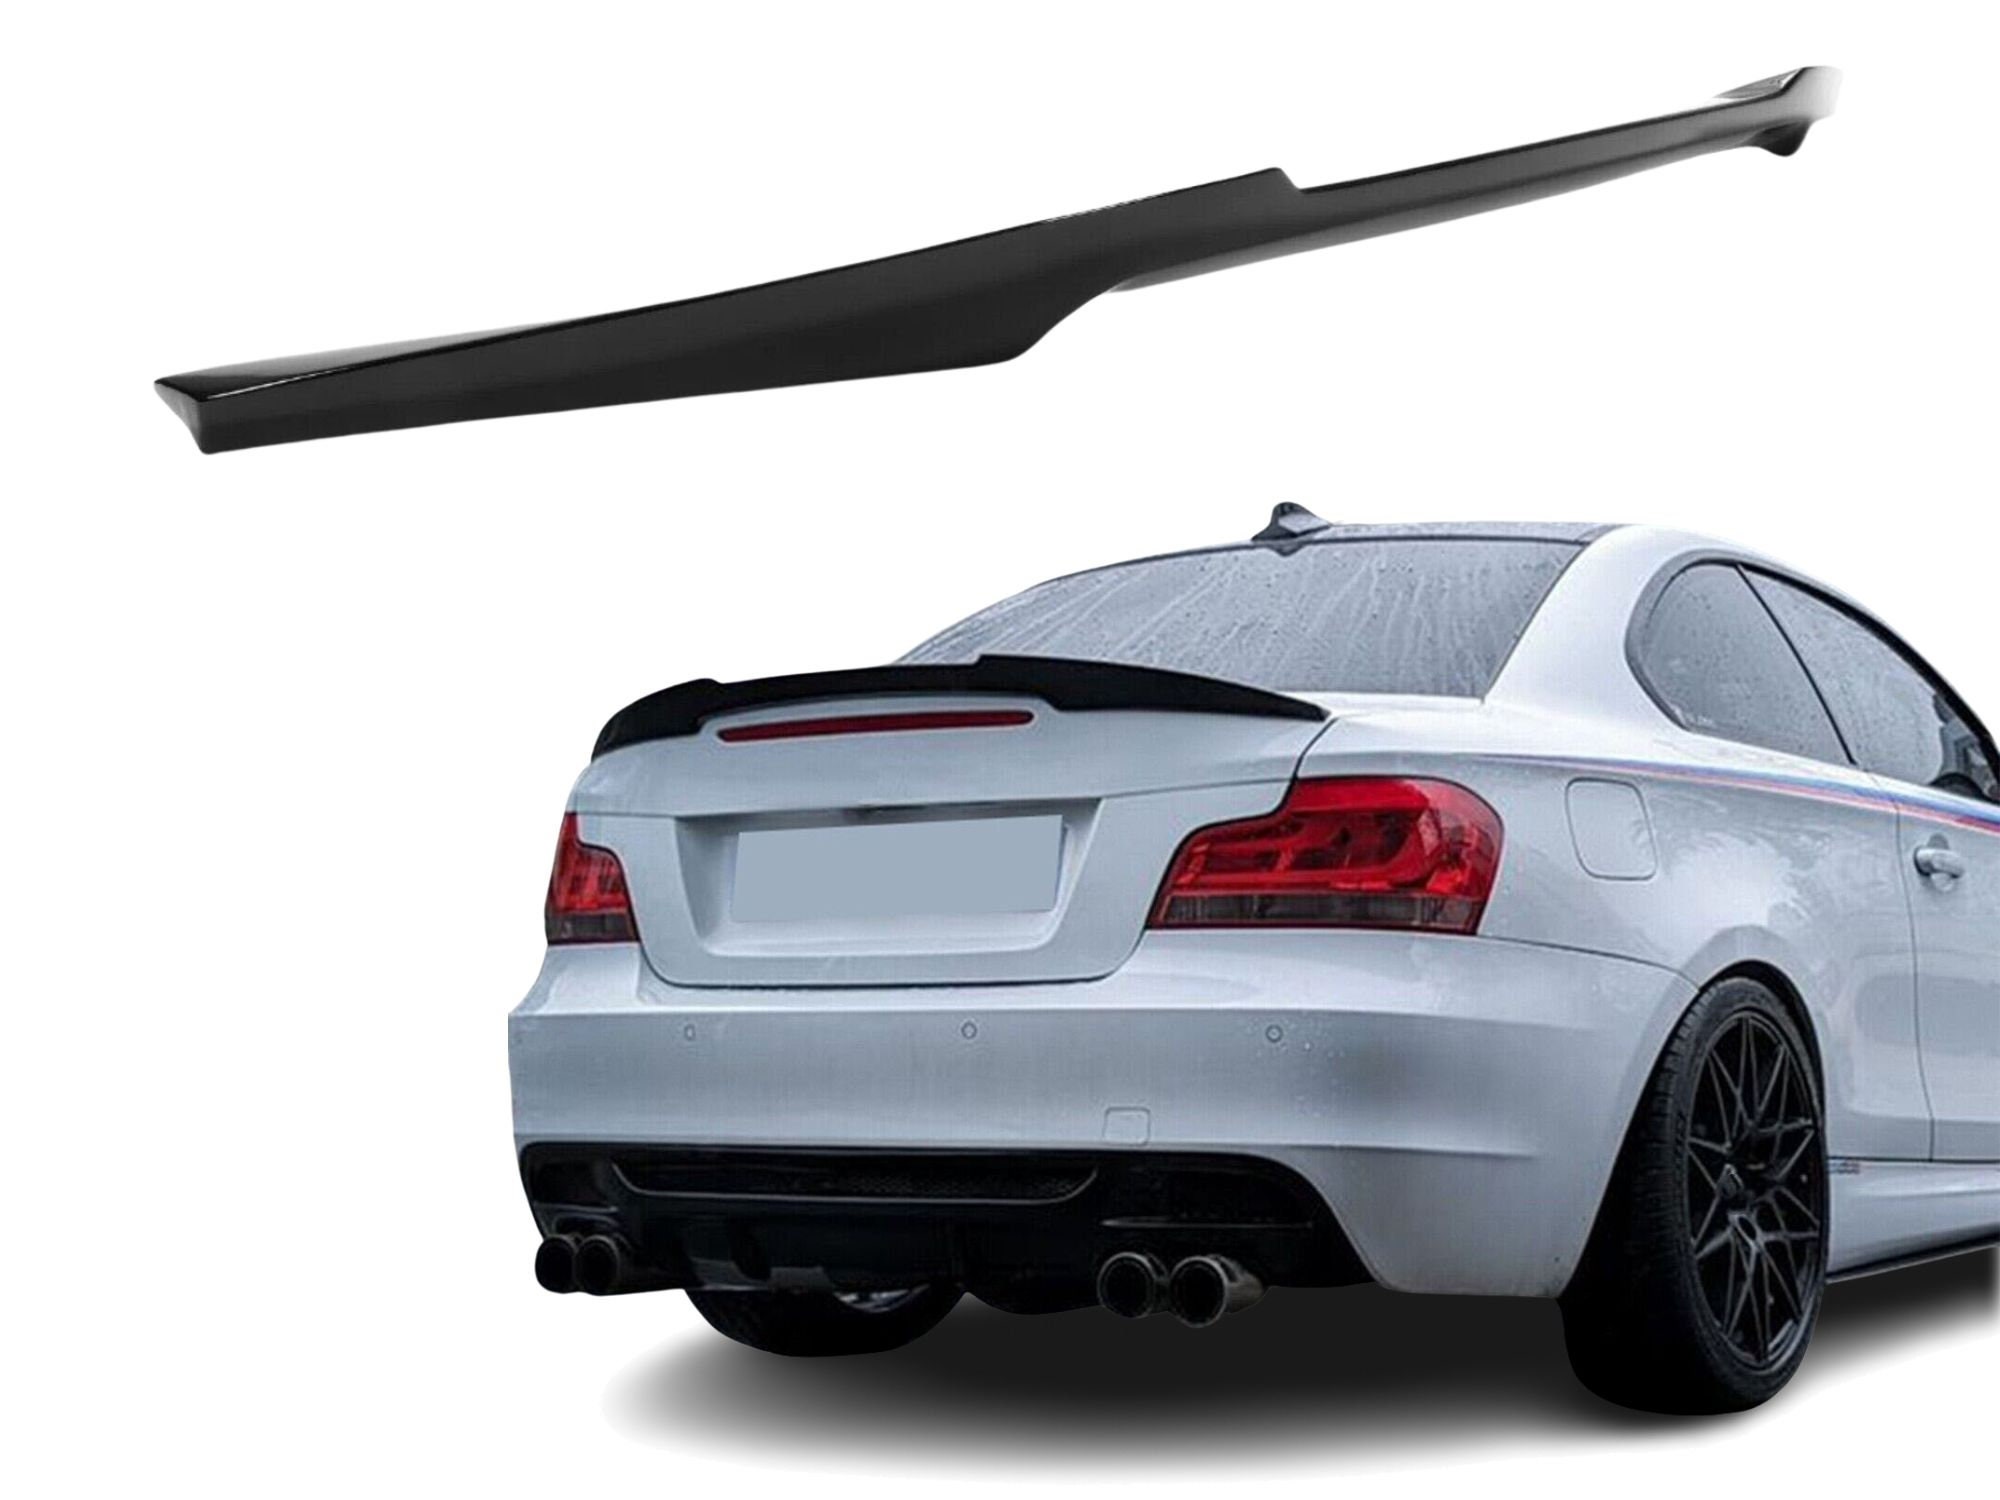 Rear Spoiler Suitable for BMW E82 Coupe, Rear Wing, Spoiler Lip for Car  Tuning, ABS Plastic 